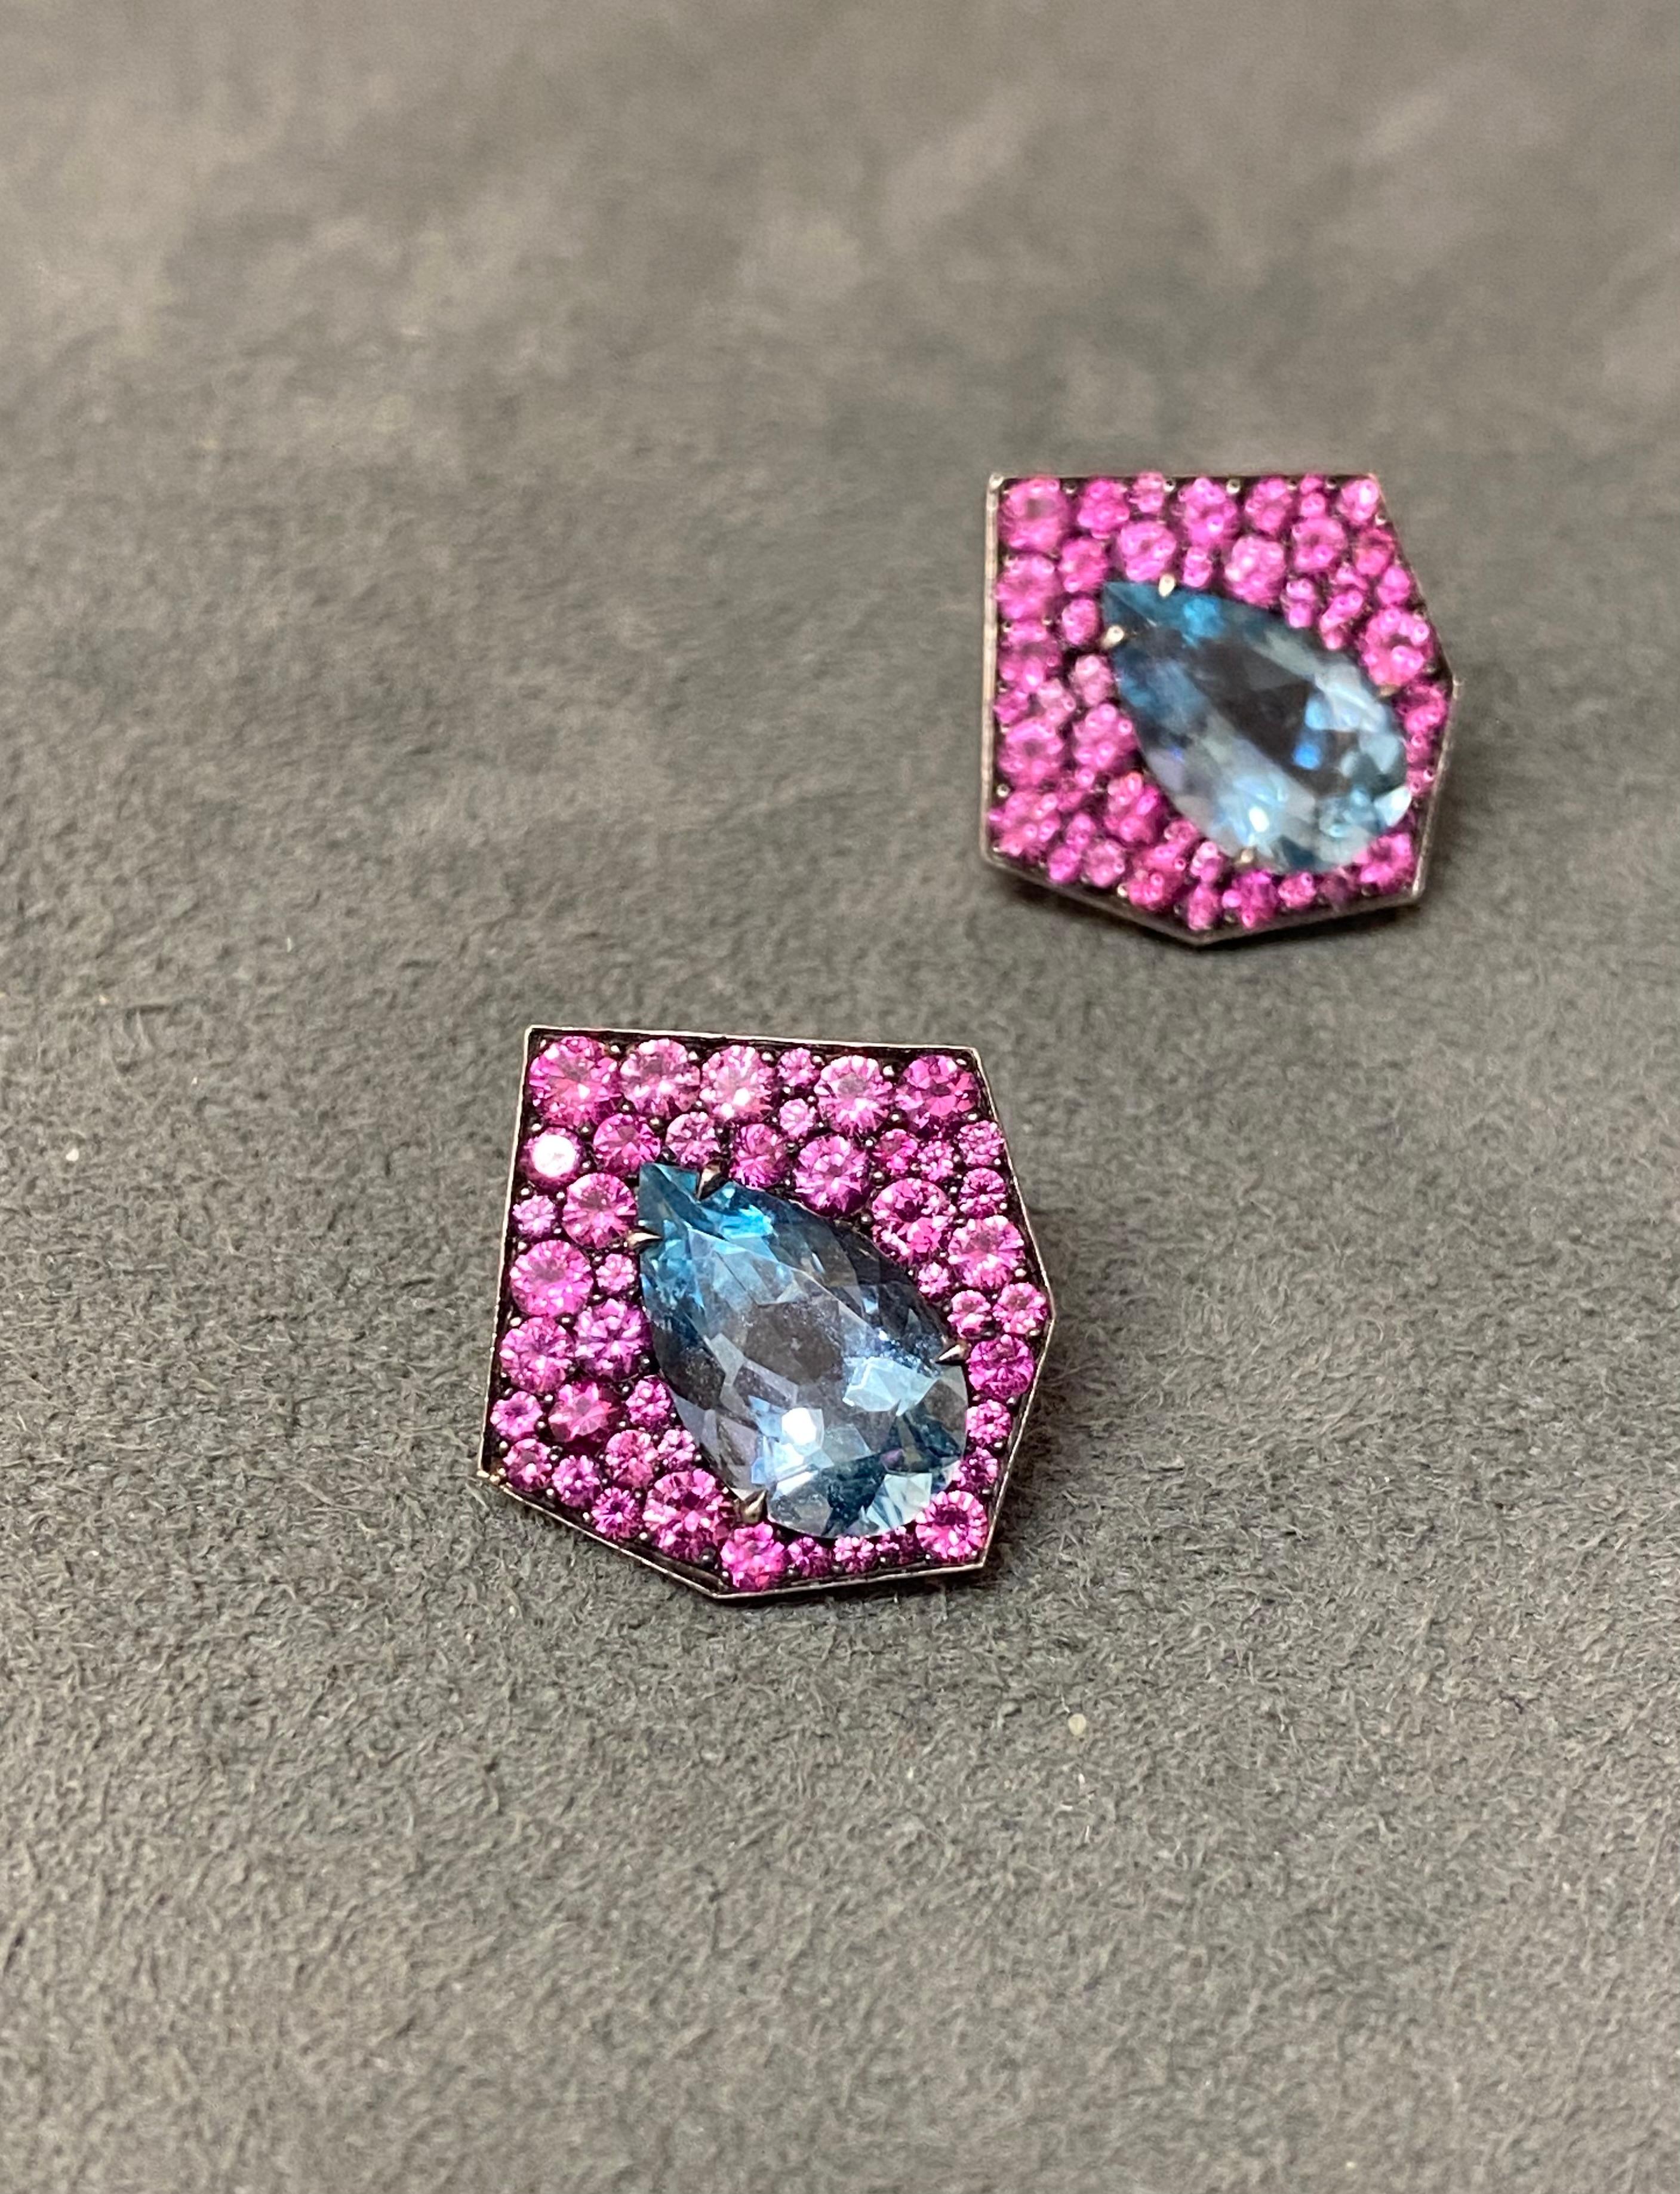 Two pear shaped aquamarines set with pink sapphires in 18k rose gold and blackened silver. The two aquamarines have a combined weight of 4.09ct, and the sapphires have a combined weight of 2.47ct. The earrings come with alpha system stud backings.